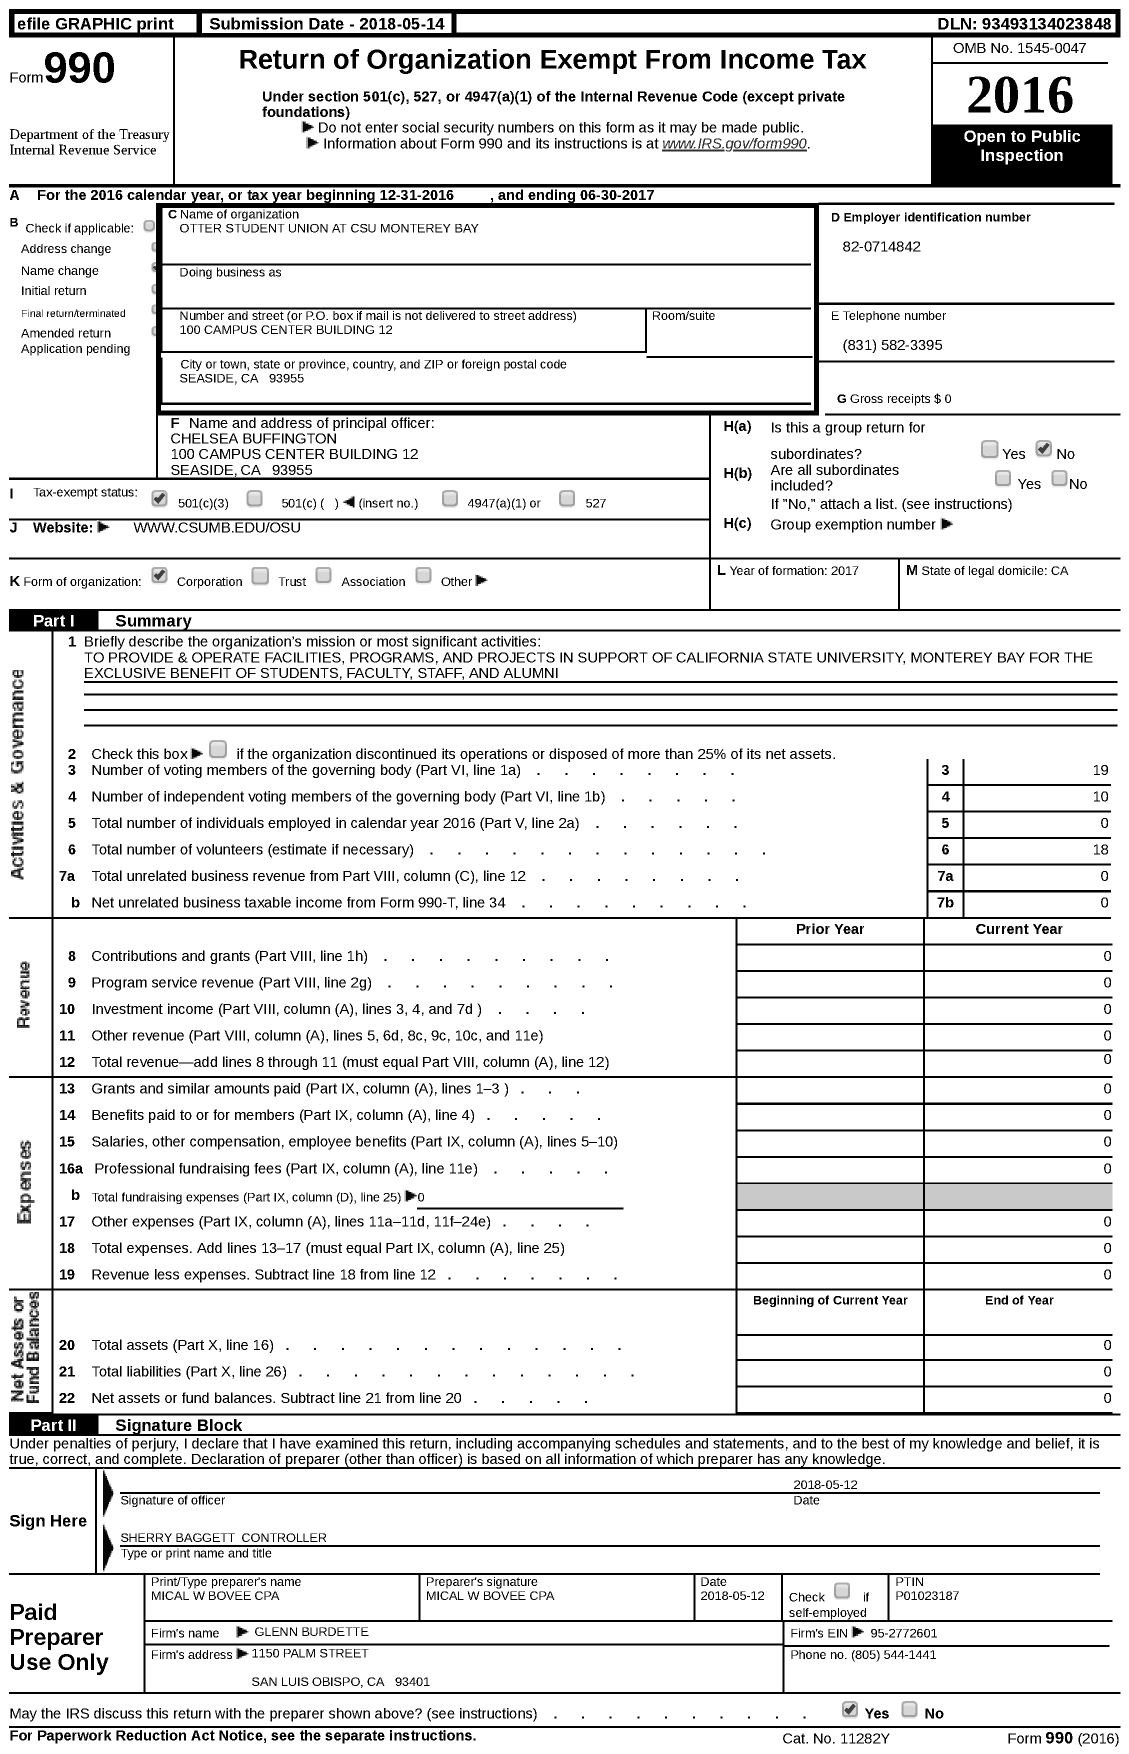 Image of first page of 2016 Form 990 for Otter Student Union at Csu Monterey Bay